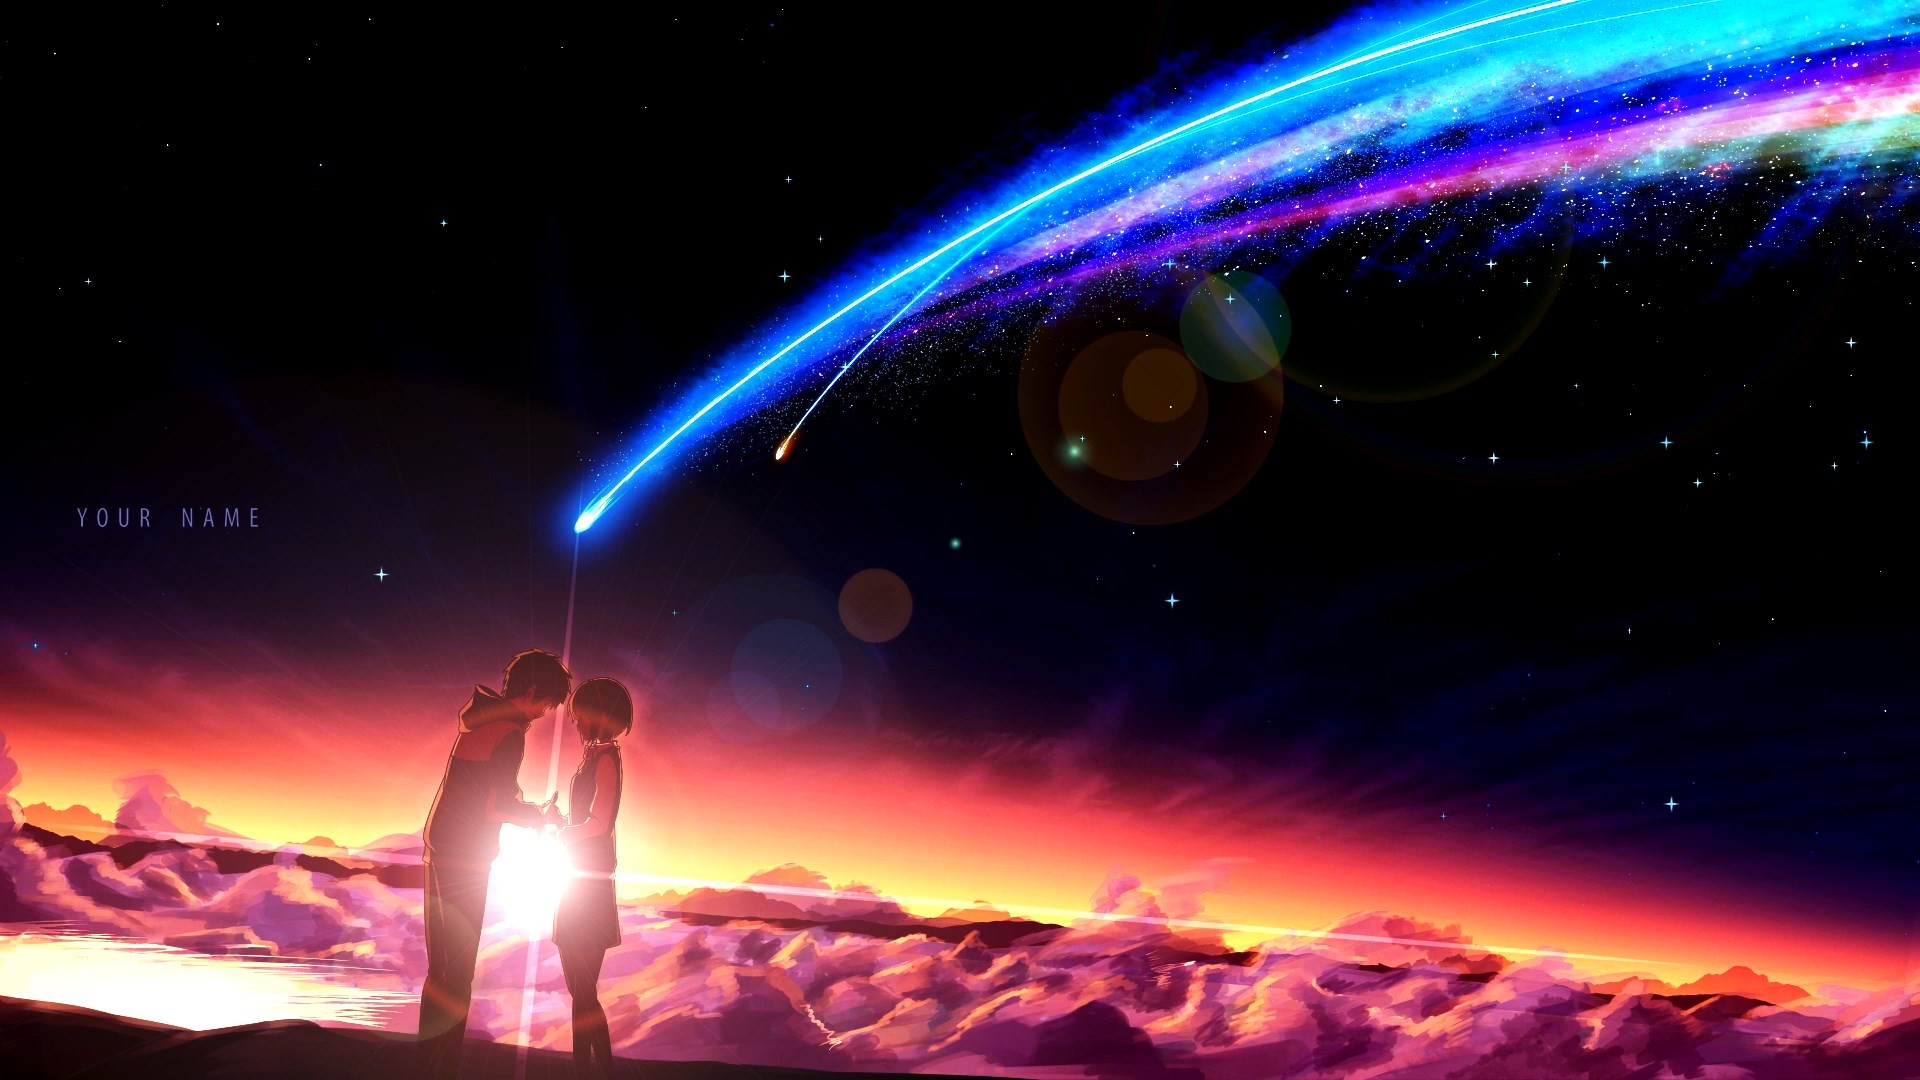 space, Your name. Wallpaper